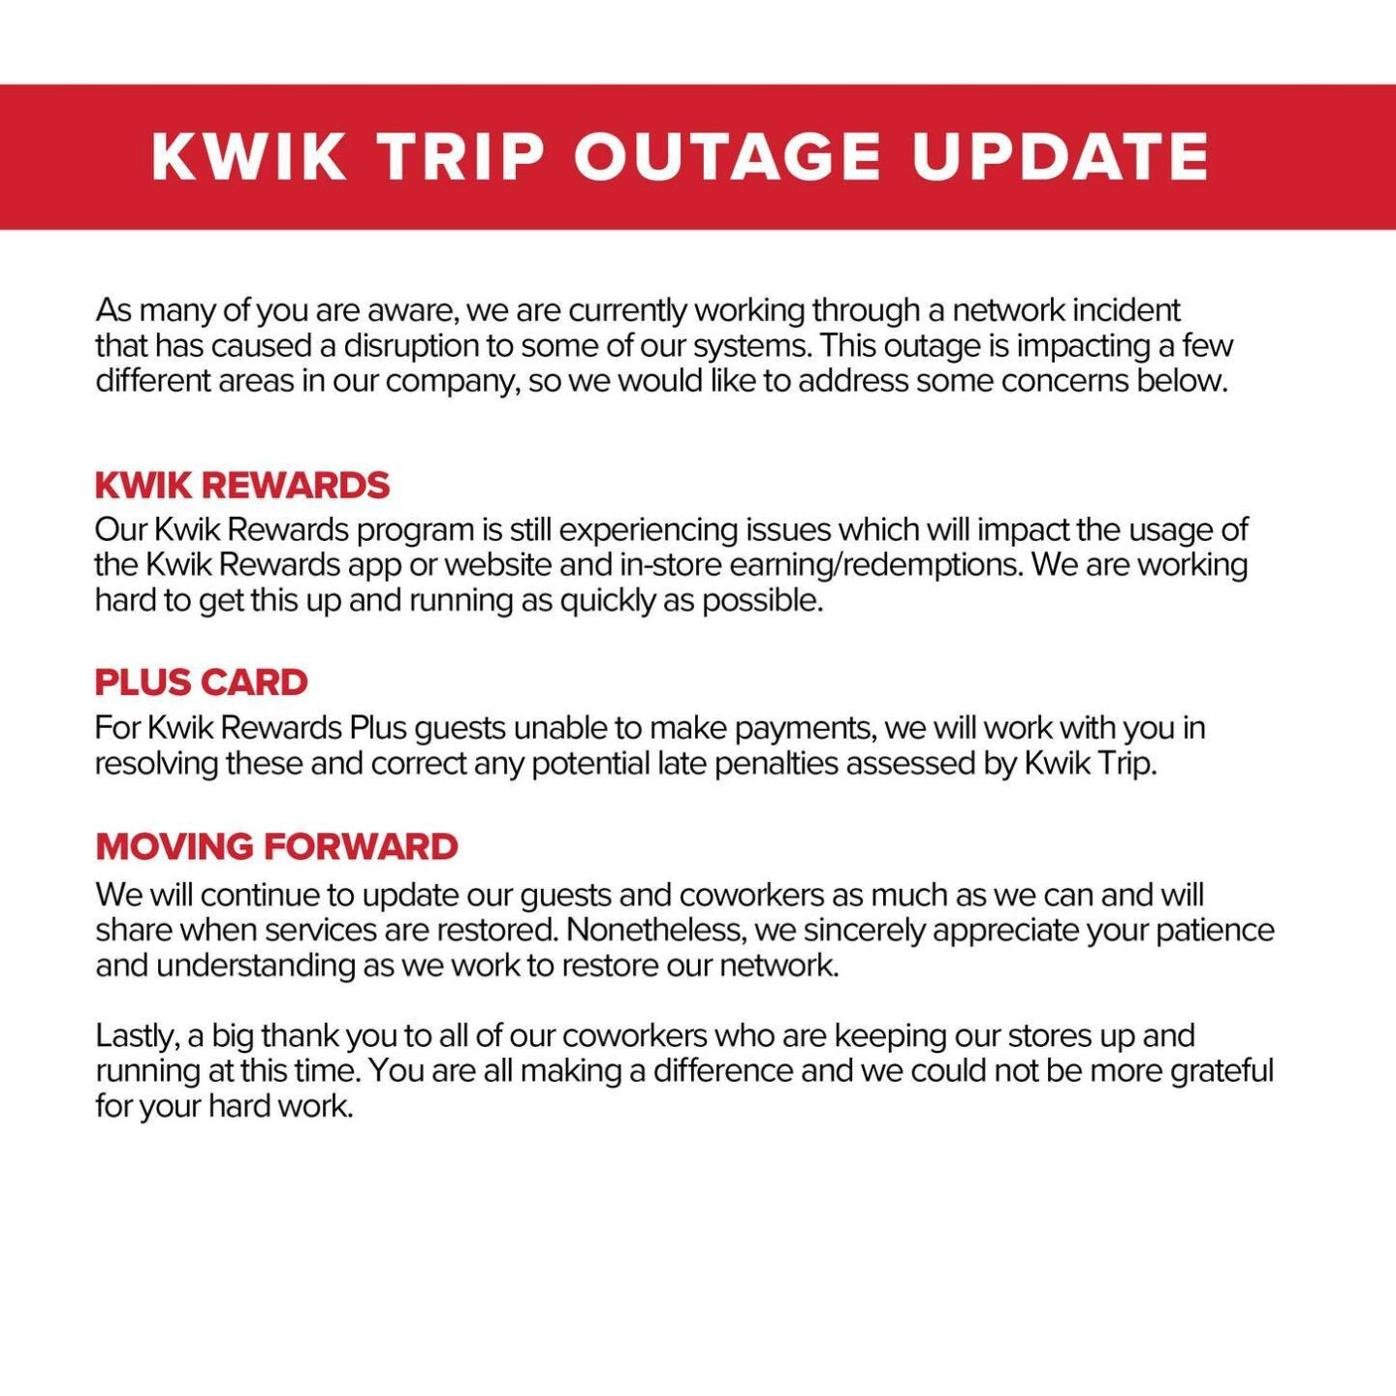 Kwik Trip shares update on outage issues, Local News